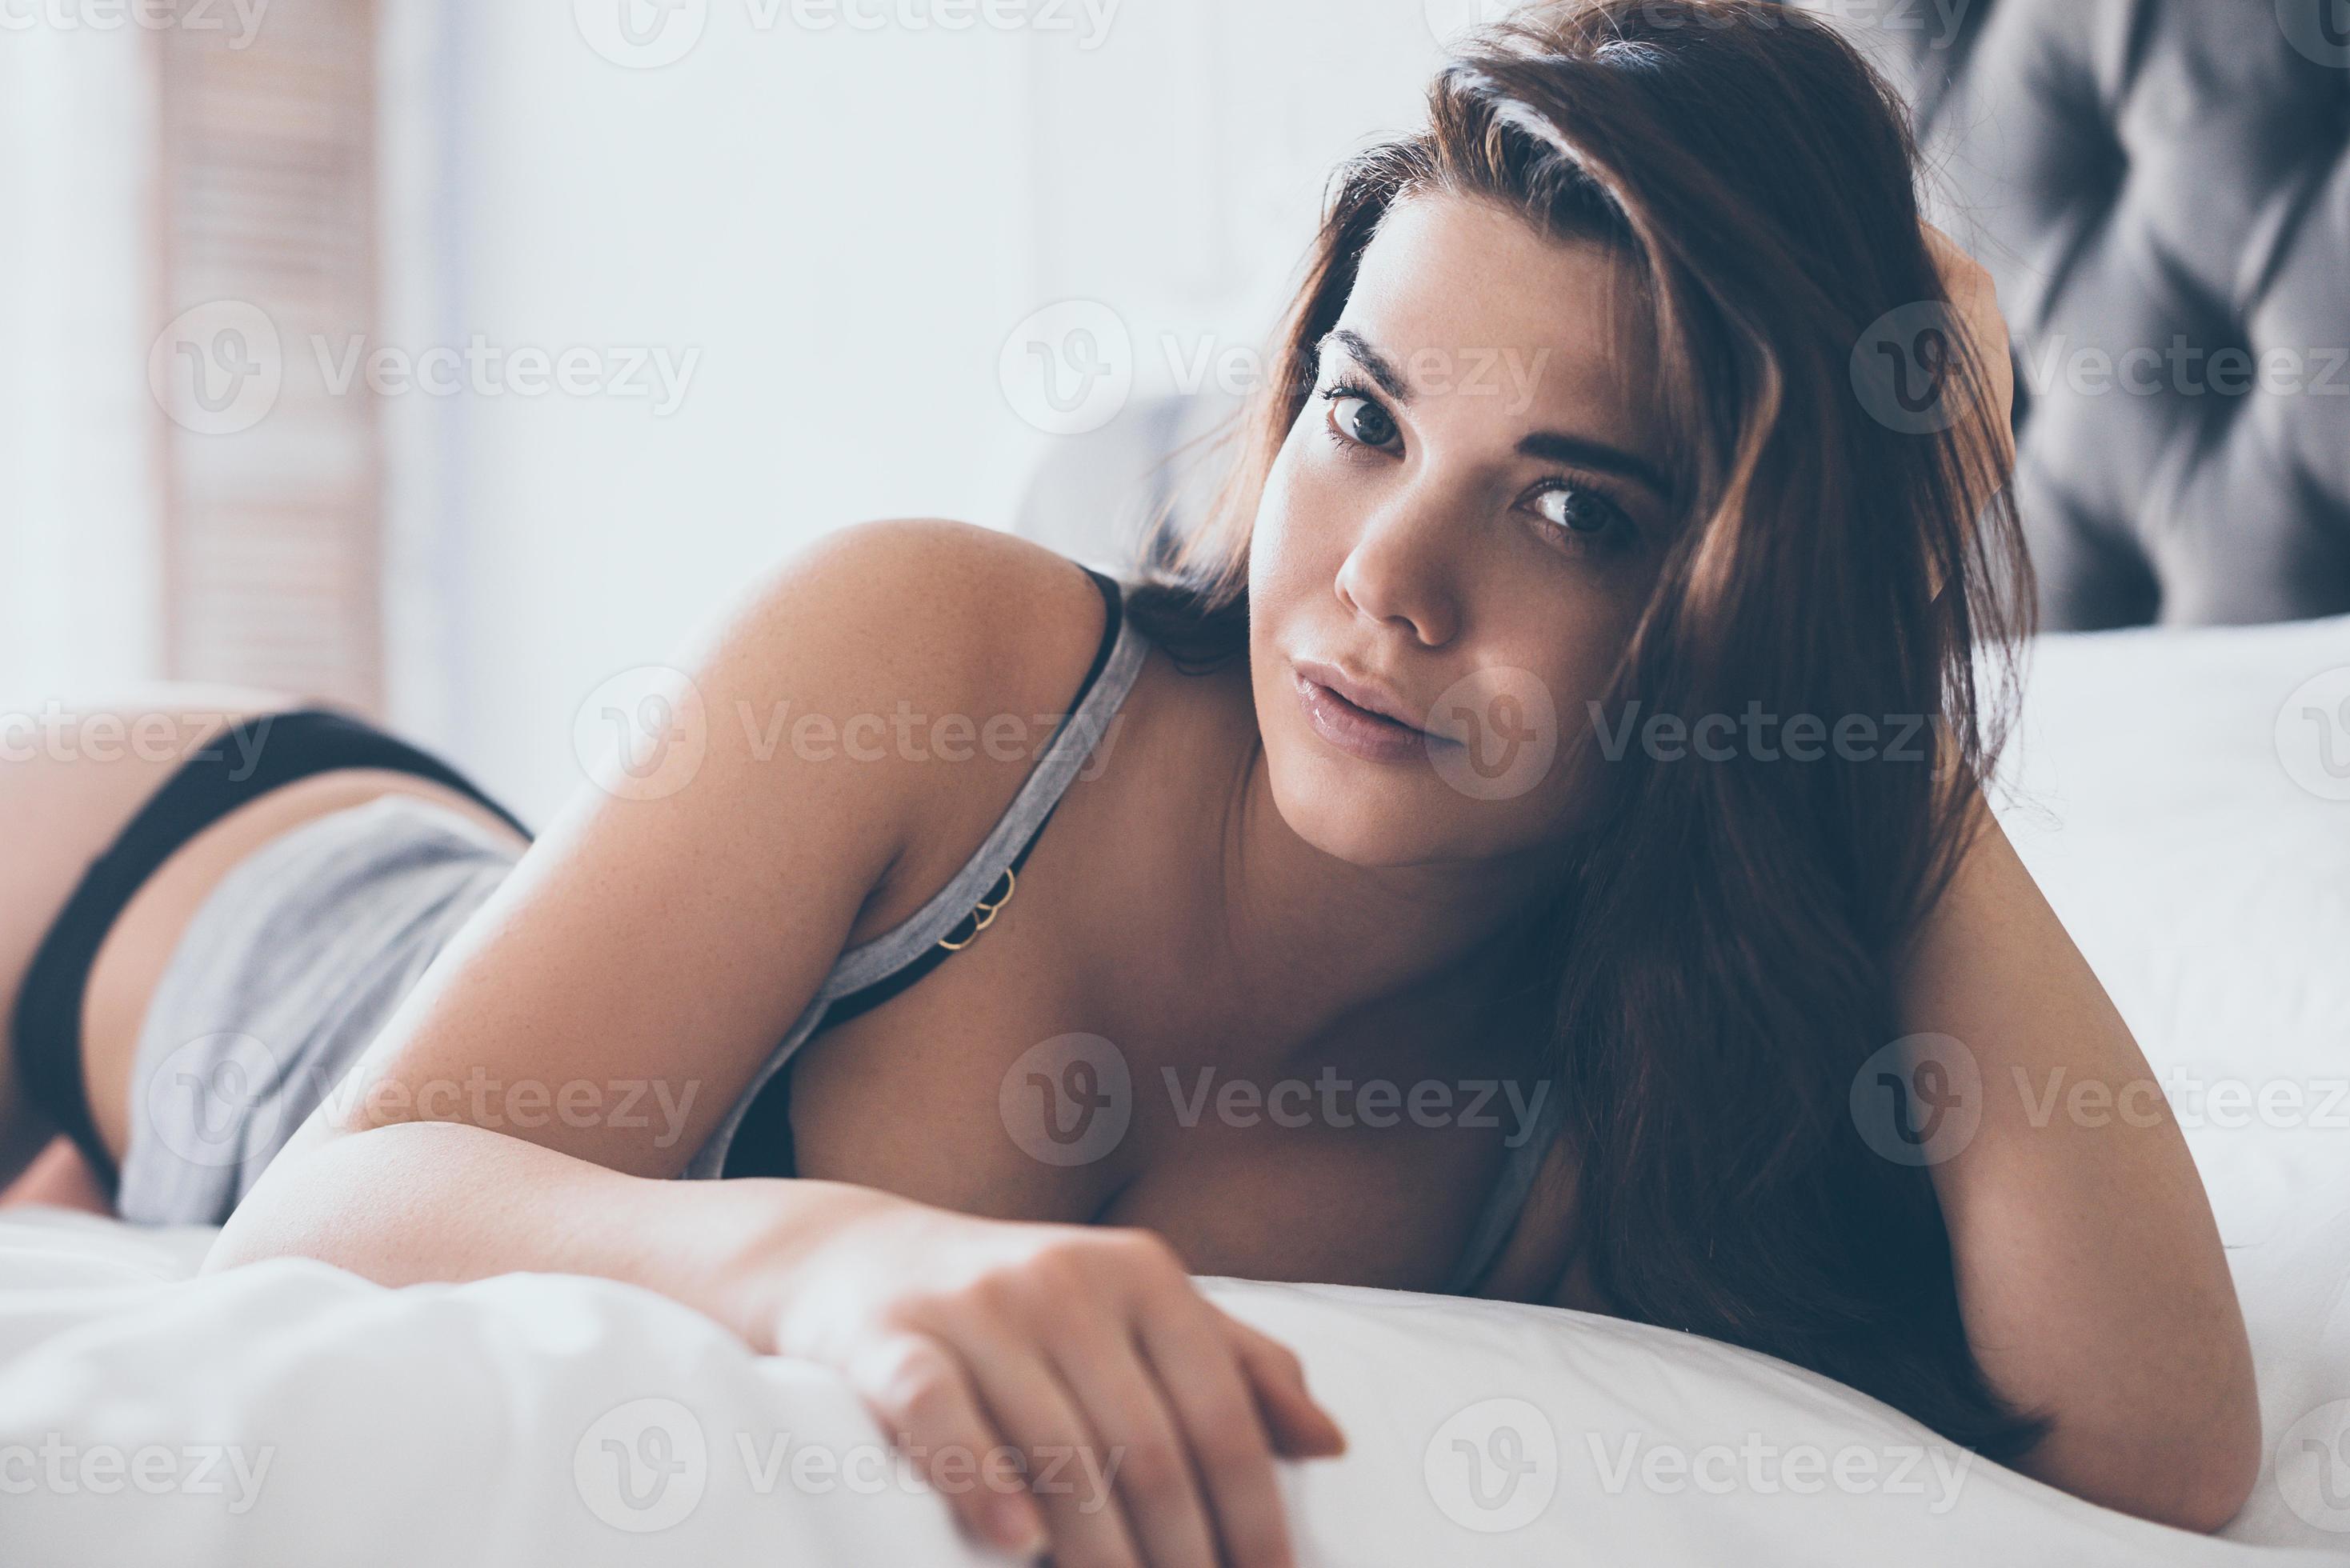 Carefree beauty. Beautiful young woman in black lingerie and tank top  looking at camera while lying on front in bed 13521597 Stock Photo at  Vecteezy